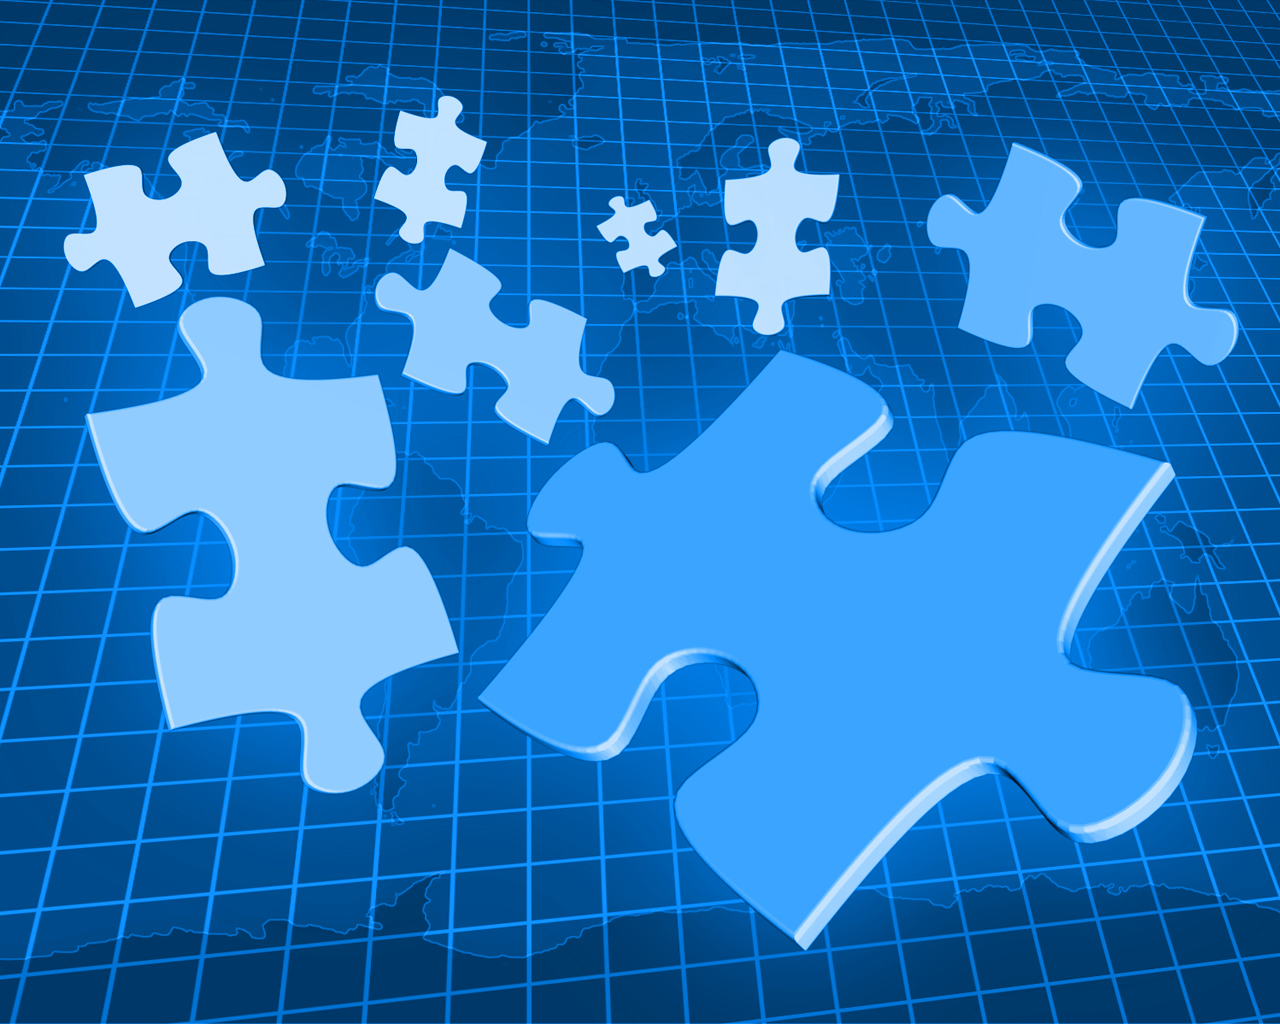 Flying Puzzle Pieces free powerpoint background